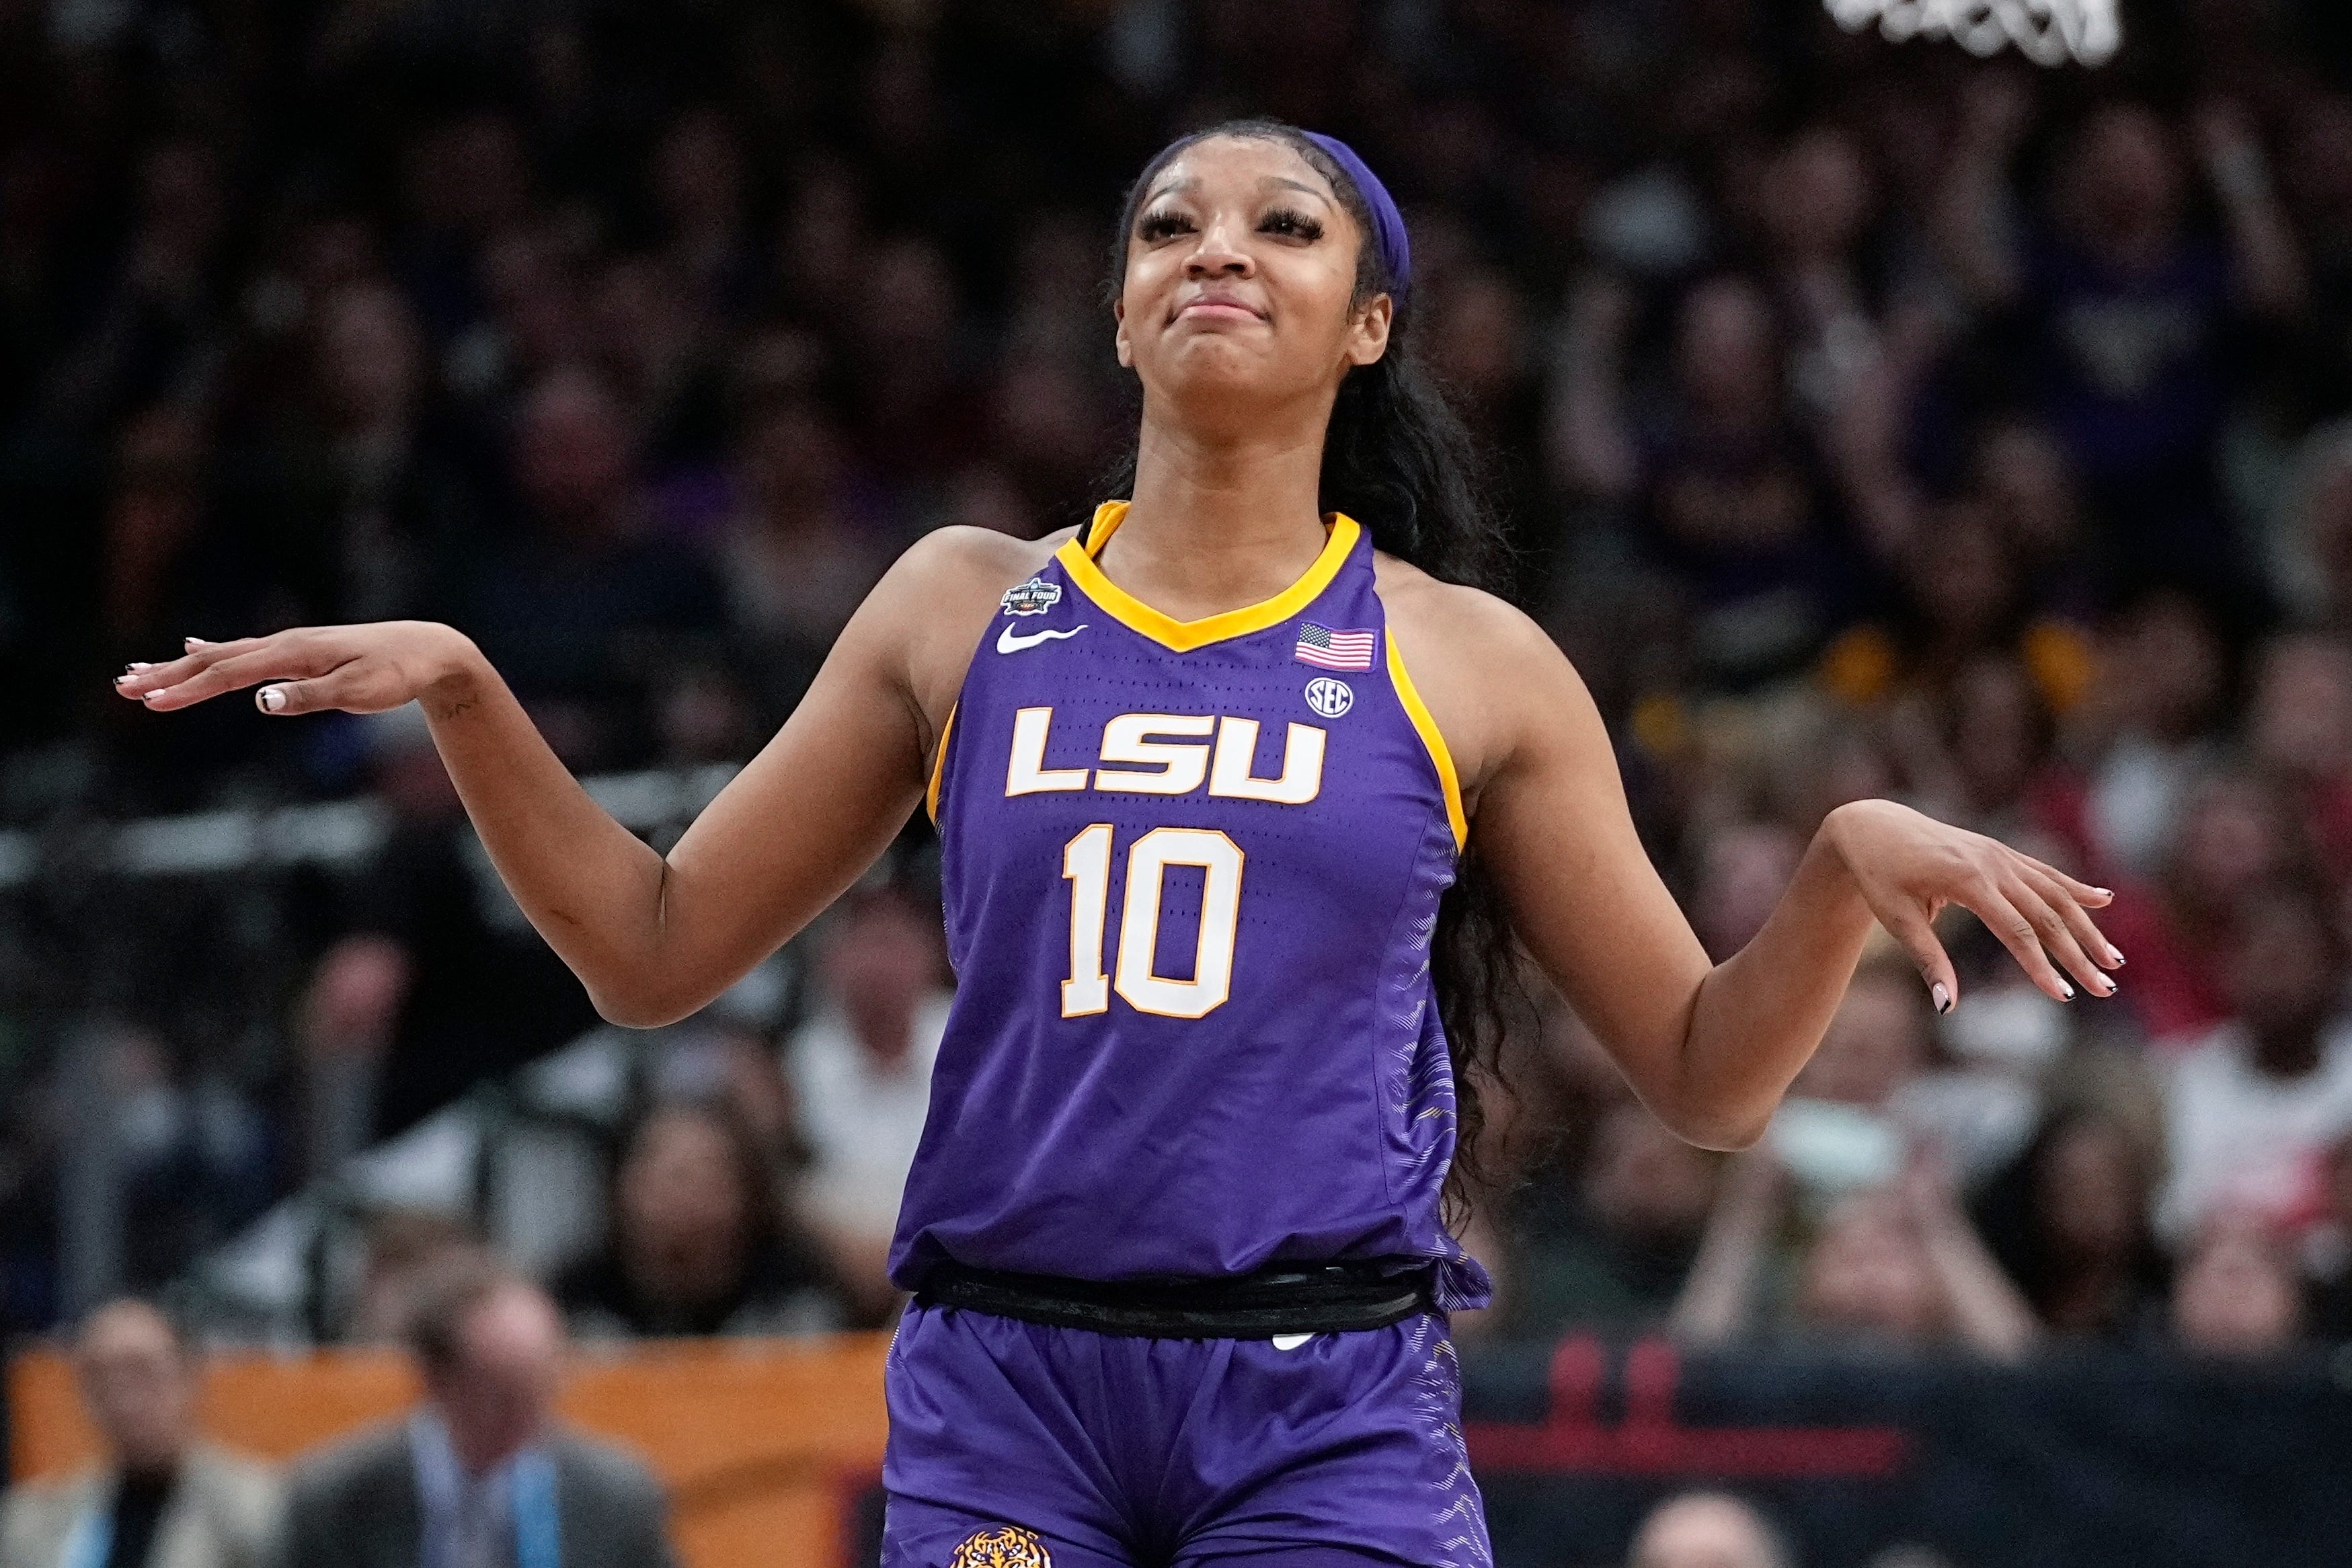 LSU's Angel Reese celebrates after an NCAA Women's Final Four semifinals basketball game against Virginia Tech Friday, March 31, 2023, in Dallas. LSU won 79-72 to advance to the championship game on Sunday. (AP Photo/Darron Cummings)